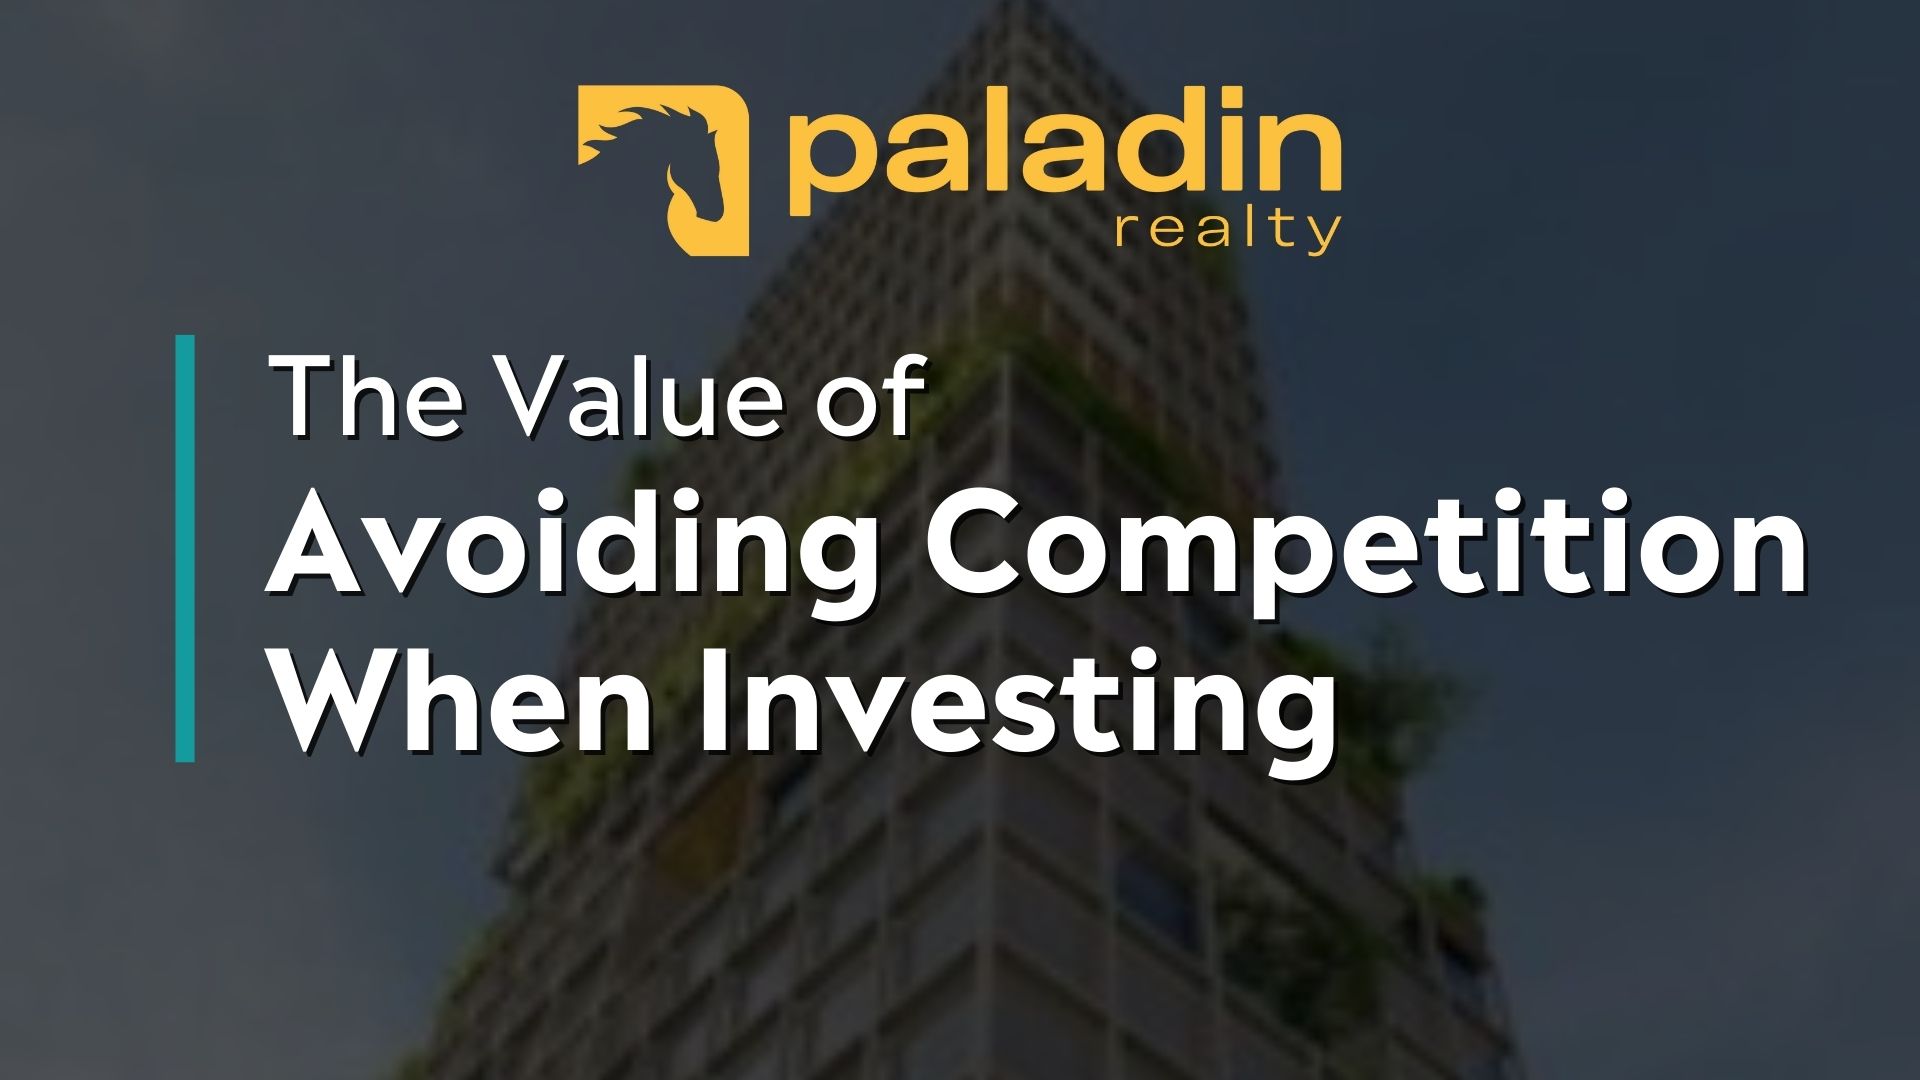 FI [Web] - The Value of Avoiding Competition When Investing